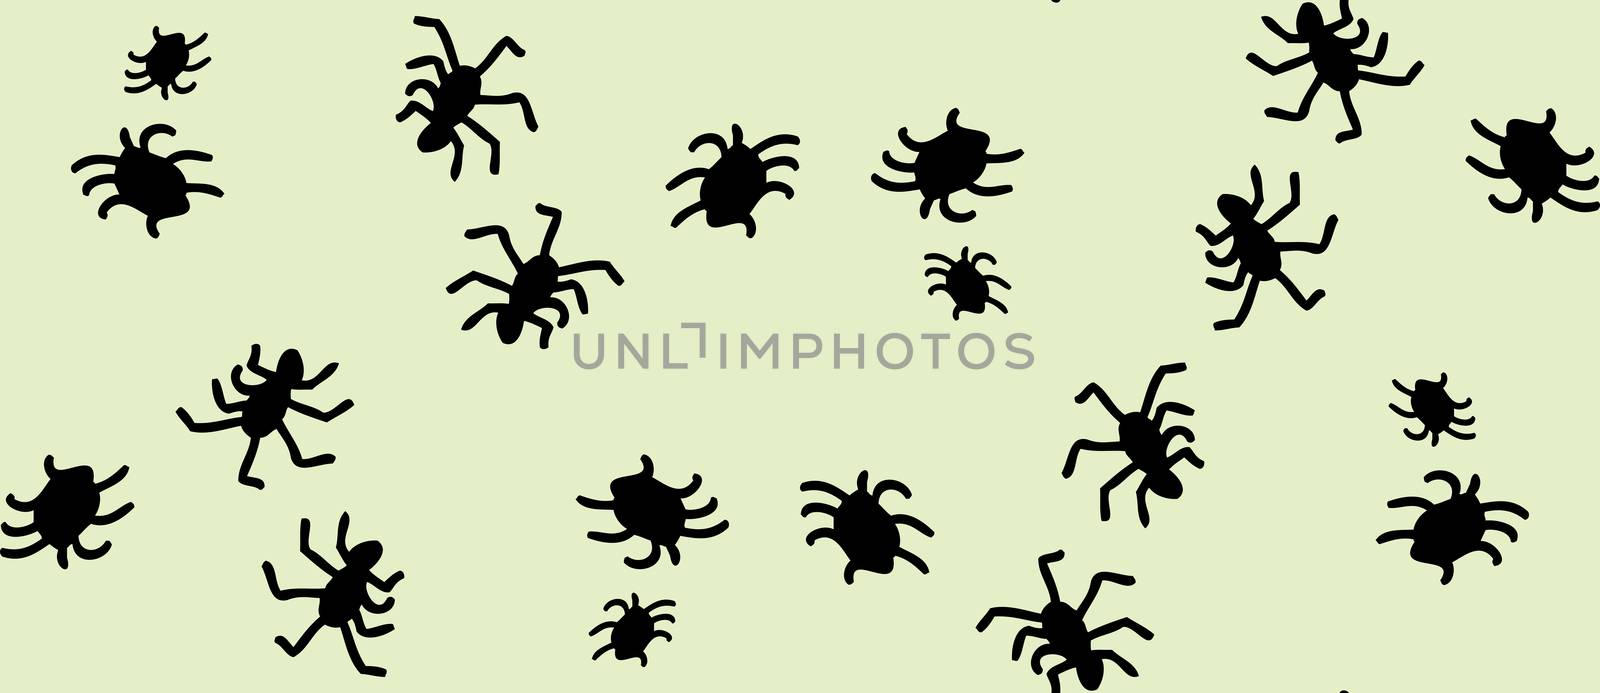 Seamless Spiders Patterns by TheBlackRhino